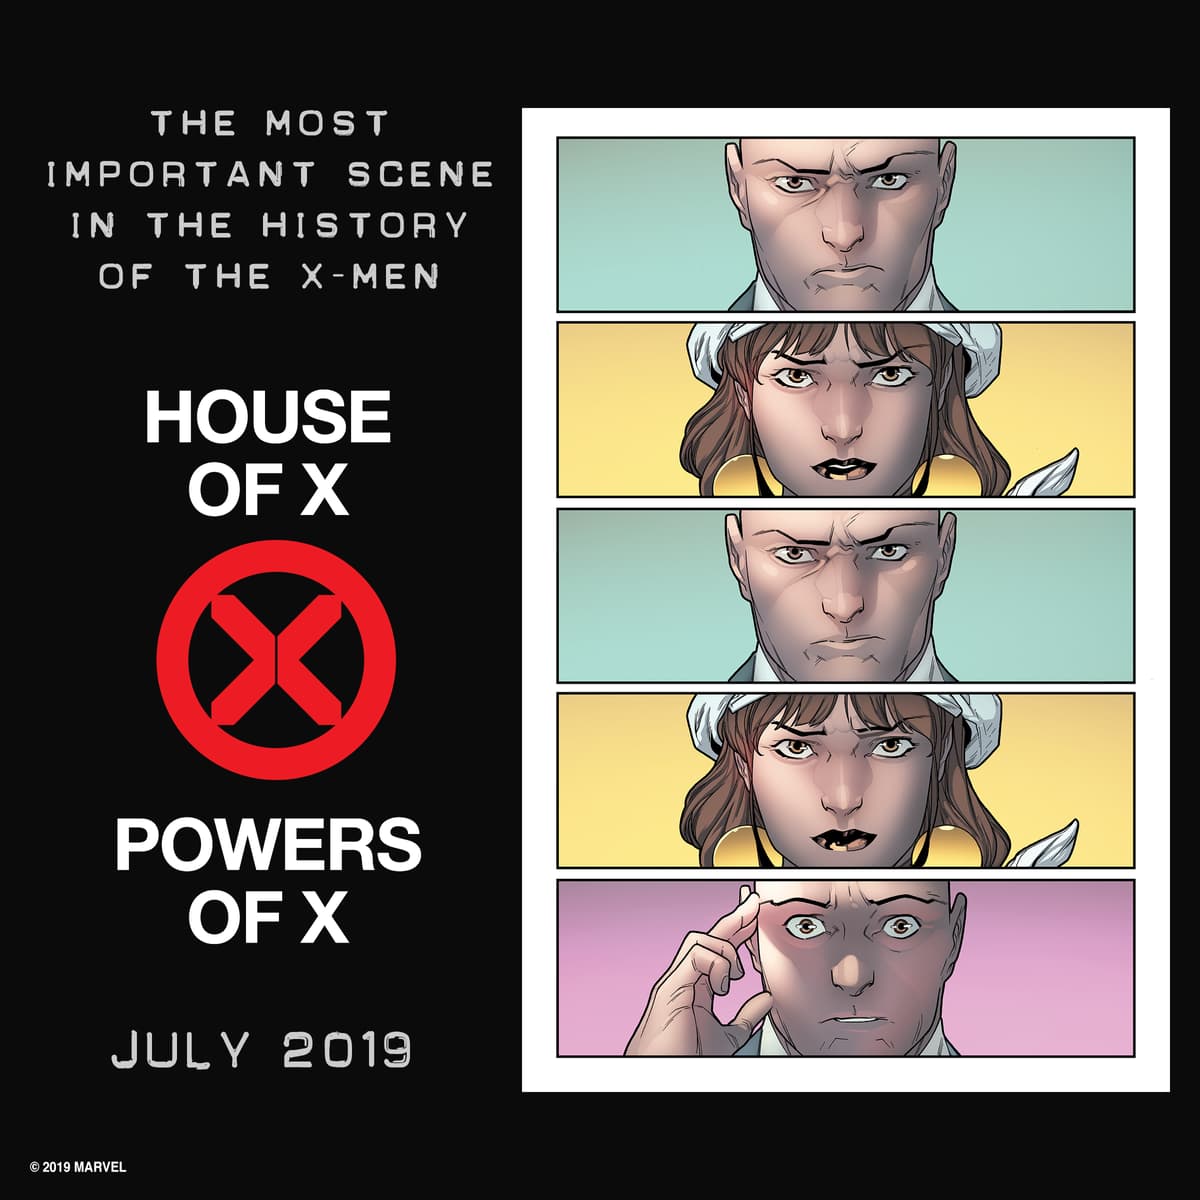 House of X. Powers of X.